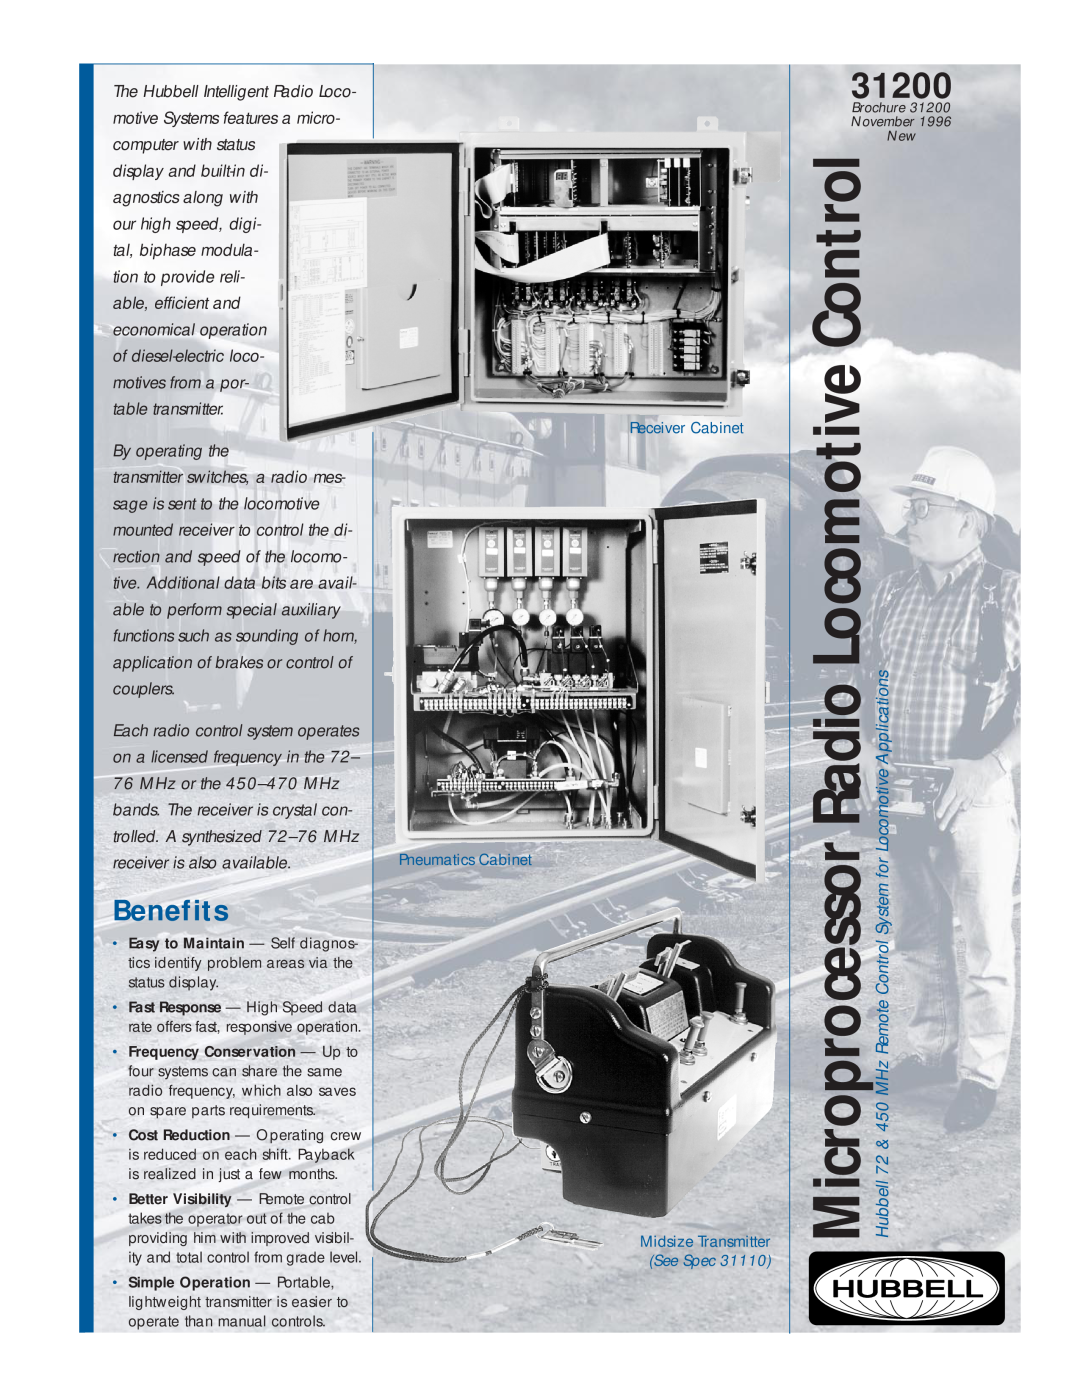 Hubbell 31200 brochure Benefits, Hubbell, By operating the, Receiver Cabinet Pneumatics Cabinet Midsize Transmitter 